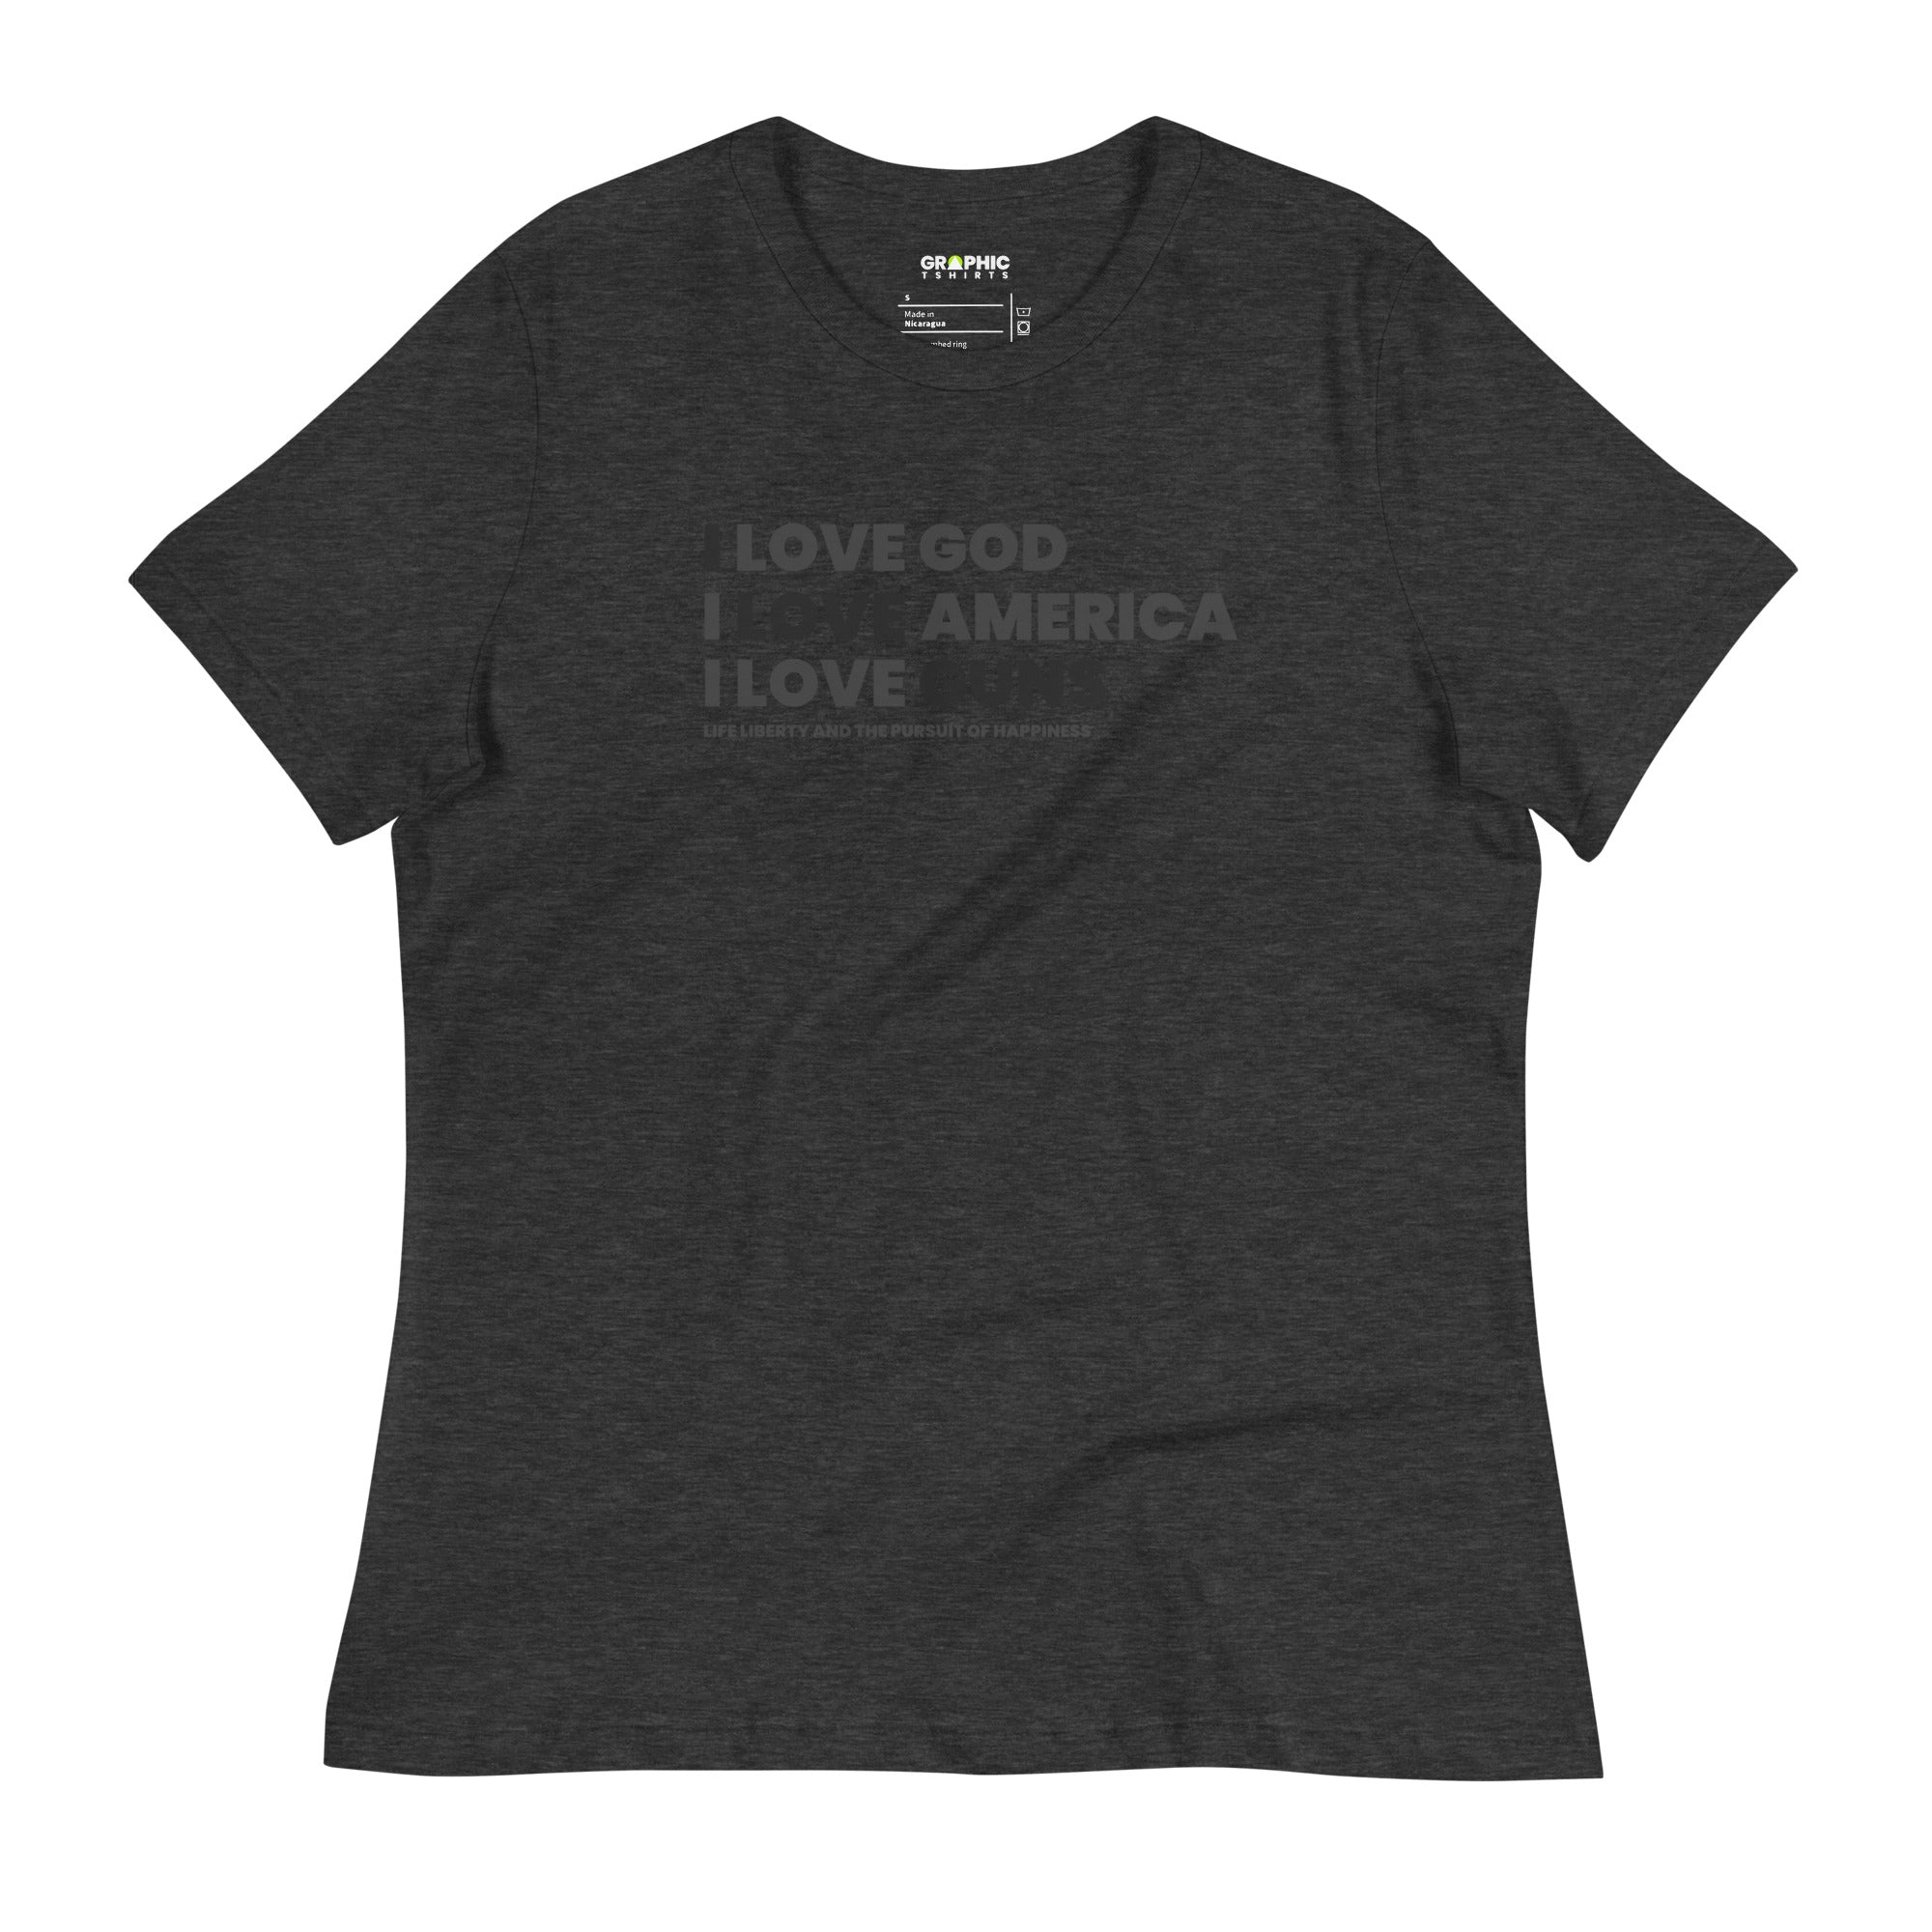 Women's Relaxed T-Shirt - I Love God. I Love America. I Love Guns. Life Liberty and the Pursuit of Happiness - GRAPHIC T-SHIRTS